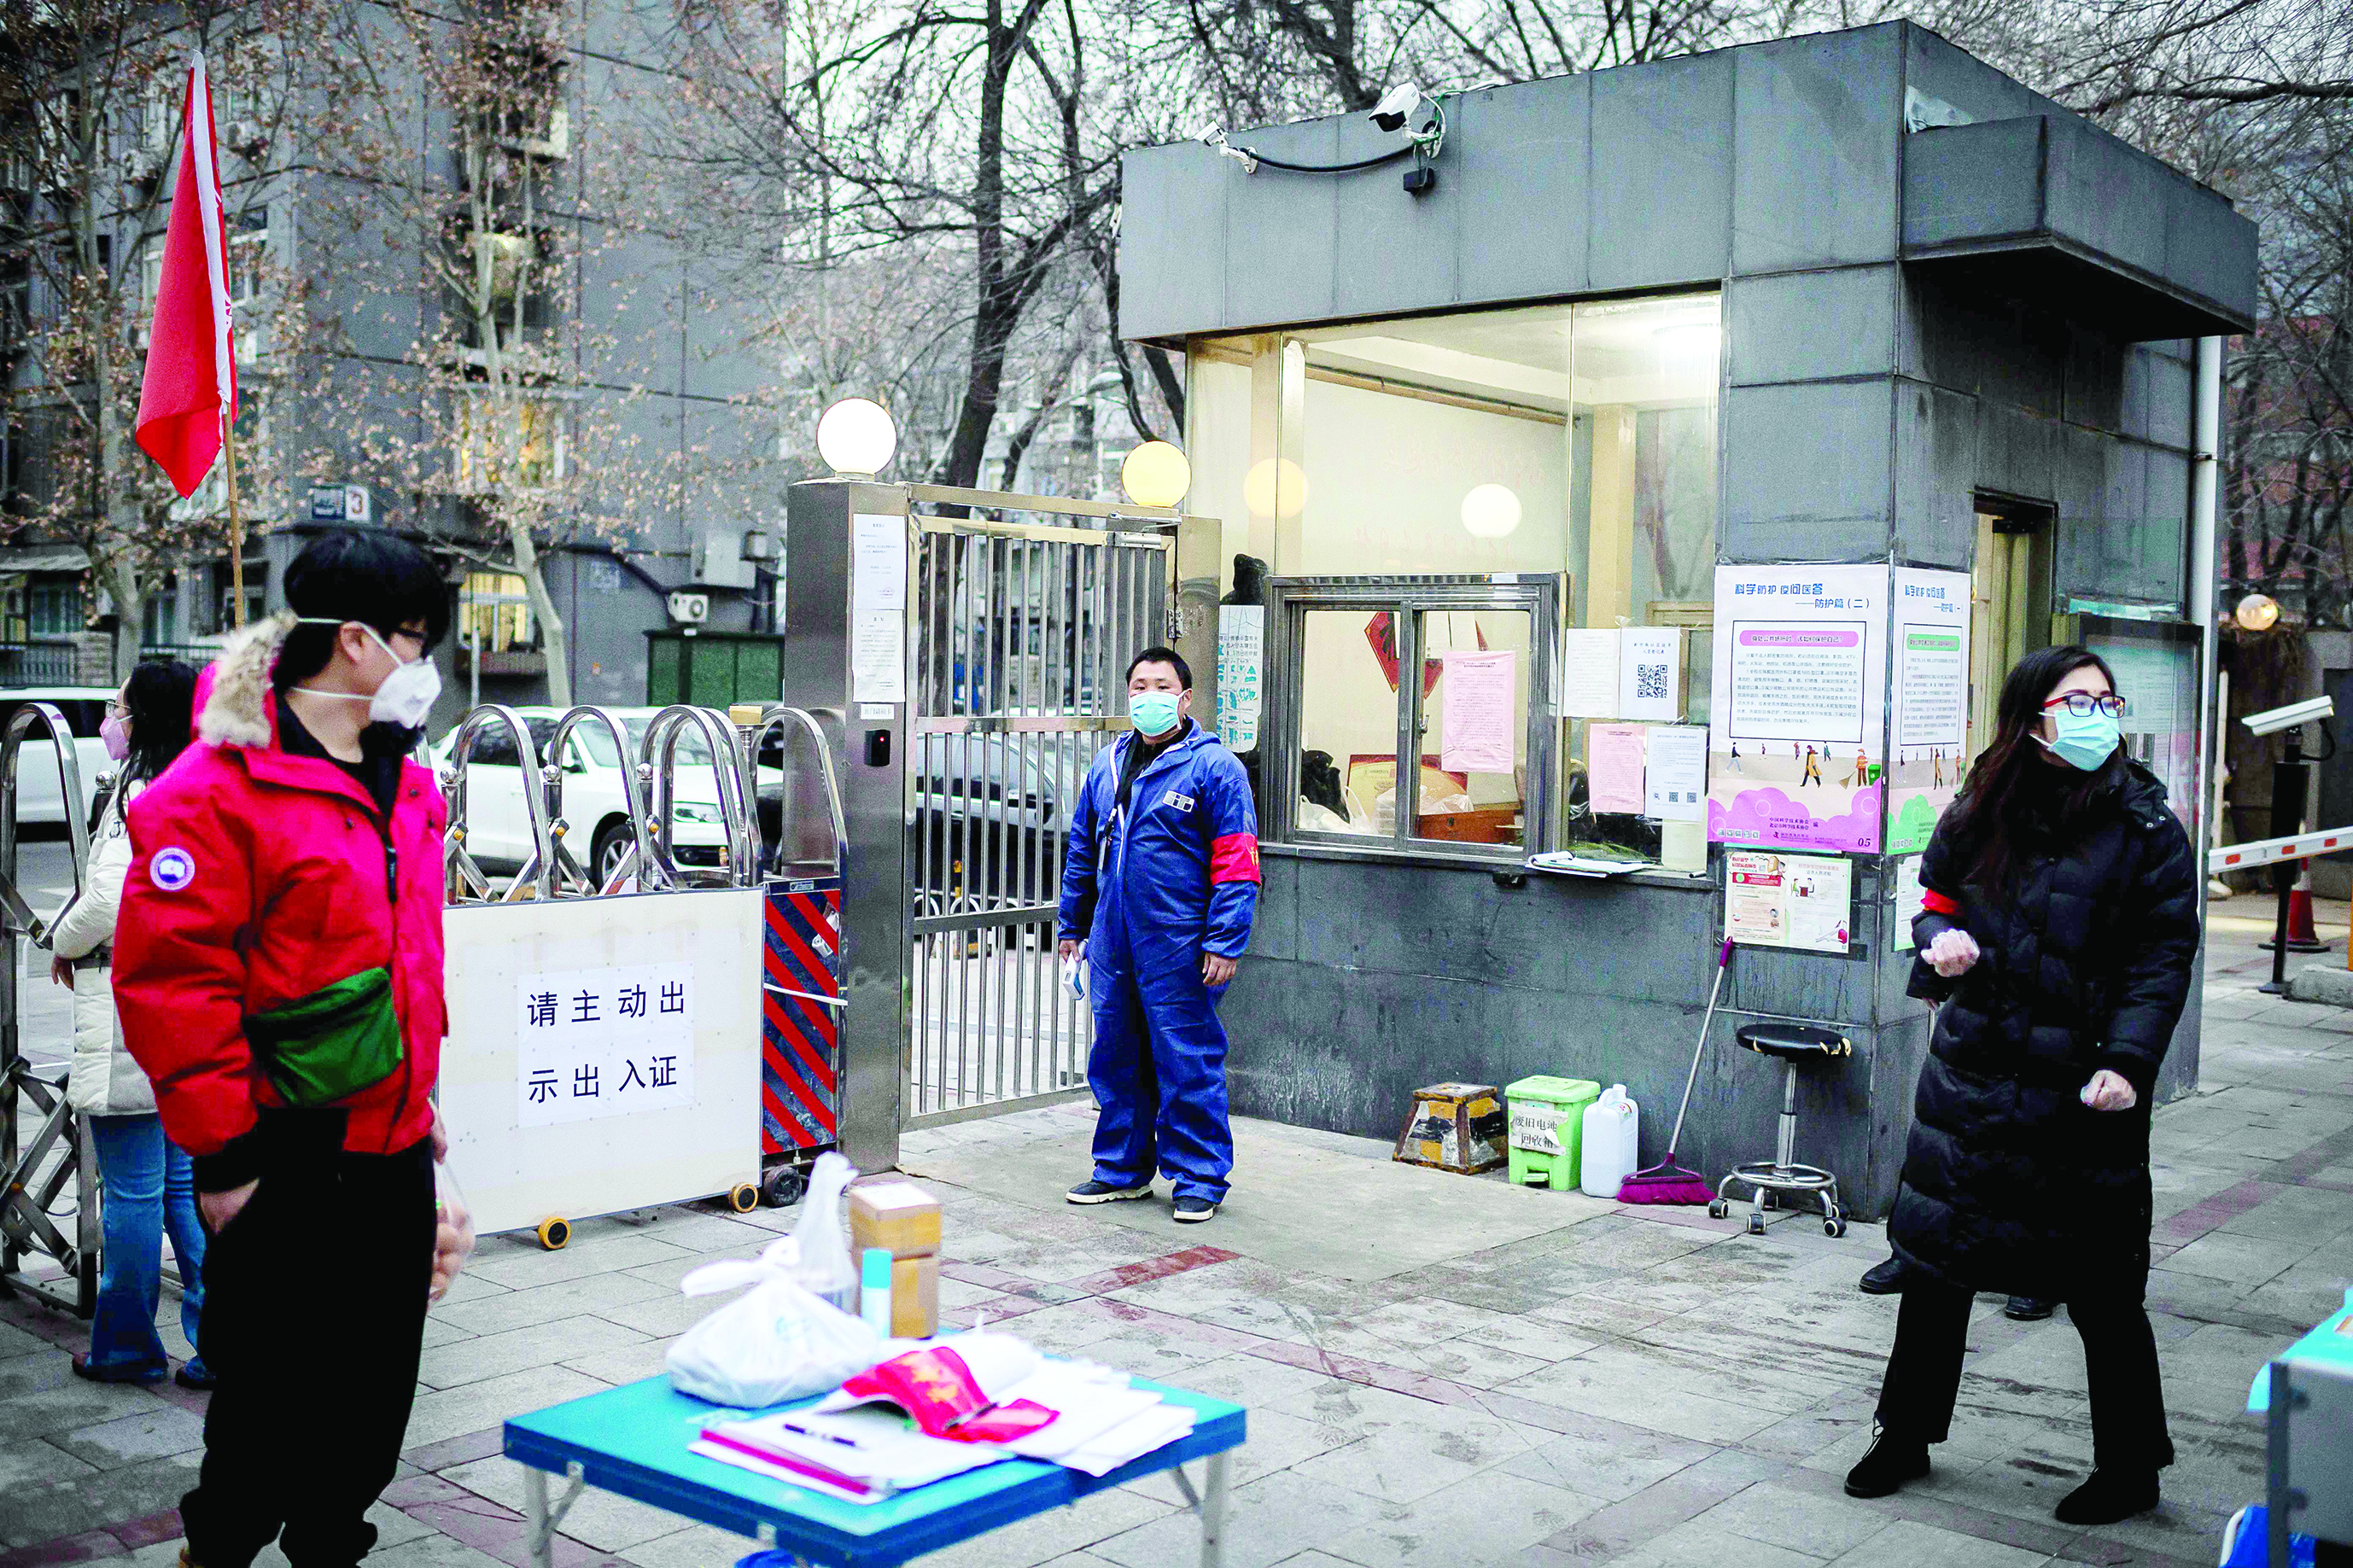 Security officers and residents wearing a protective facemask to protect against the COVID-19 coronavirus stand at the entrance of a residential compound where temperature and special cards access are needed to enter or exit, in Beijing on February 24, 2020. - The novel coronavirus has spread to more than 25 countries since it emerged in December and is causing mounting alarm due to new outbreaks in Europe, the Middle East and Asia. (Photo by NICOLAS ASFOURI / AFP)